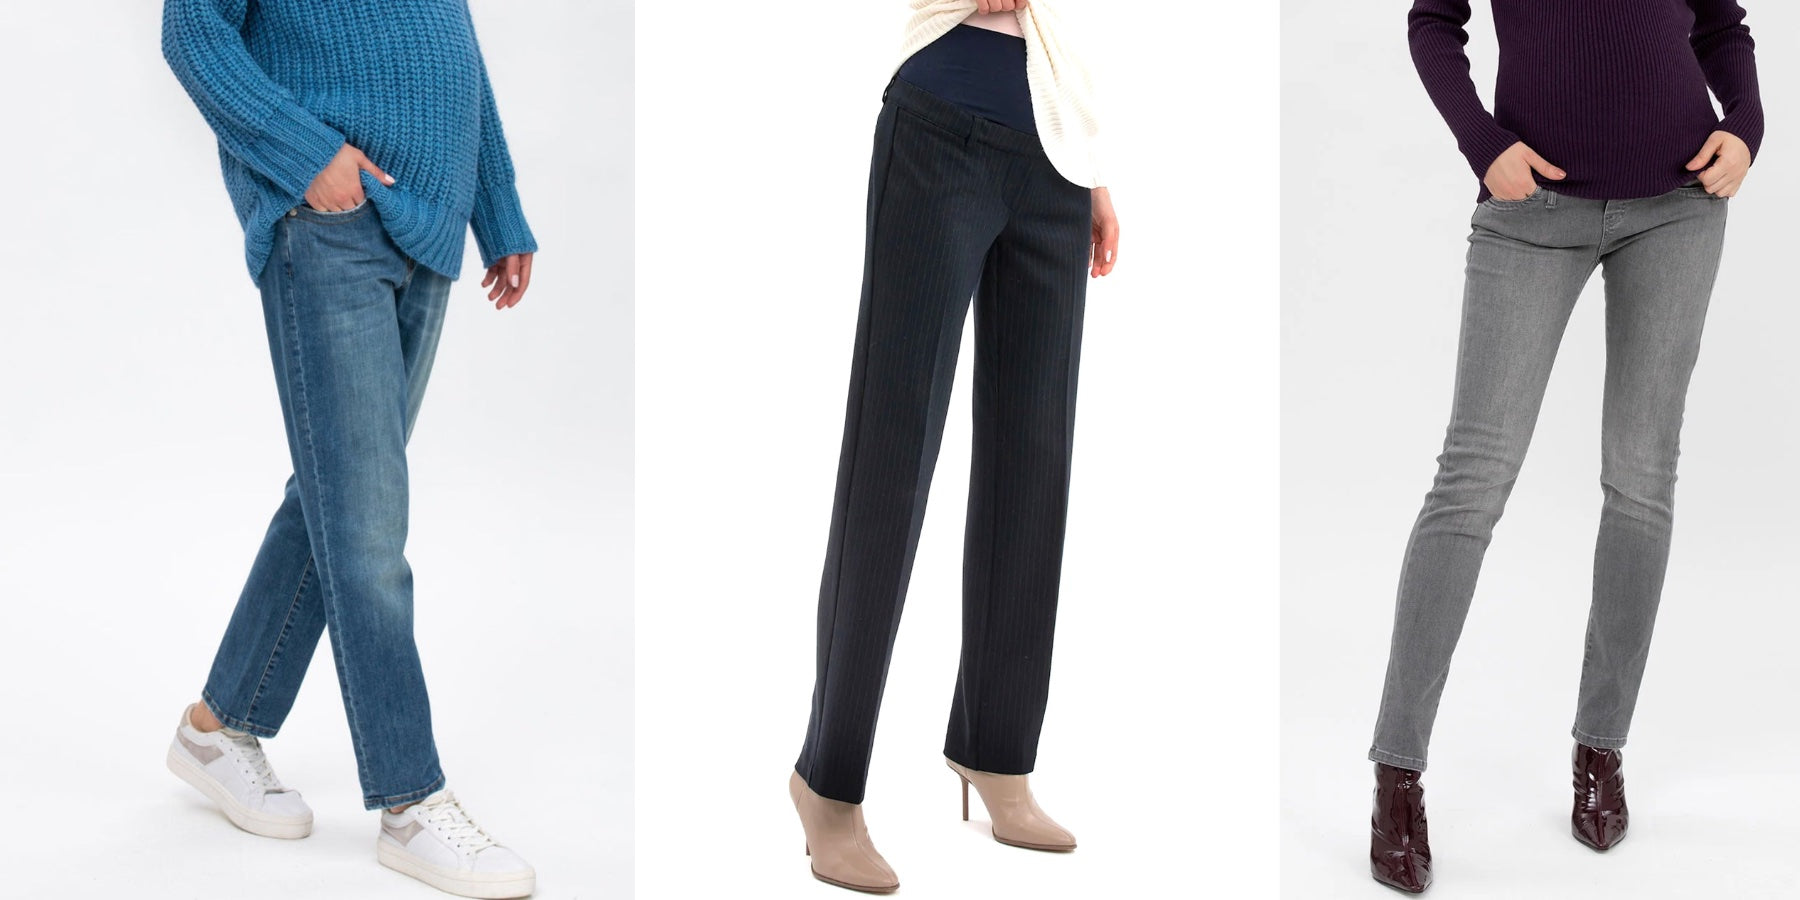 The importance of investing in quality maternity pants and jeans: Comf